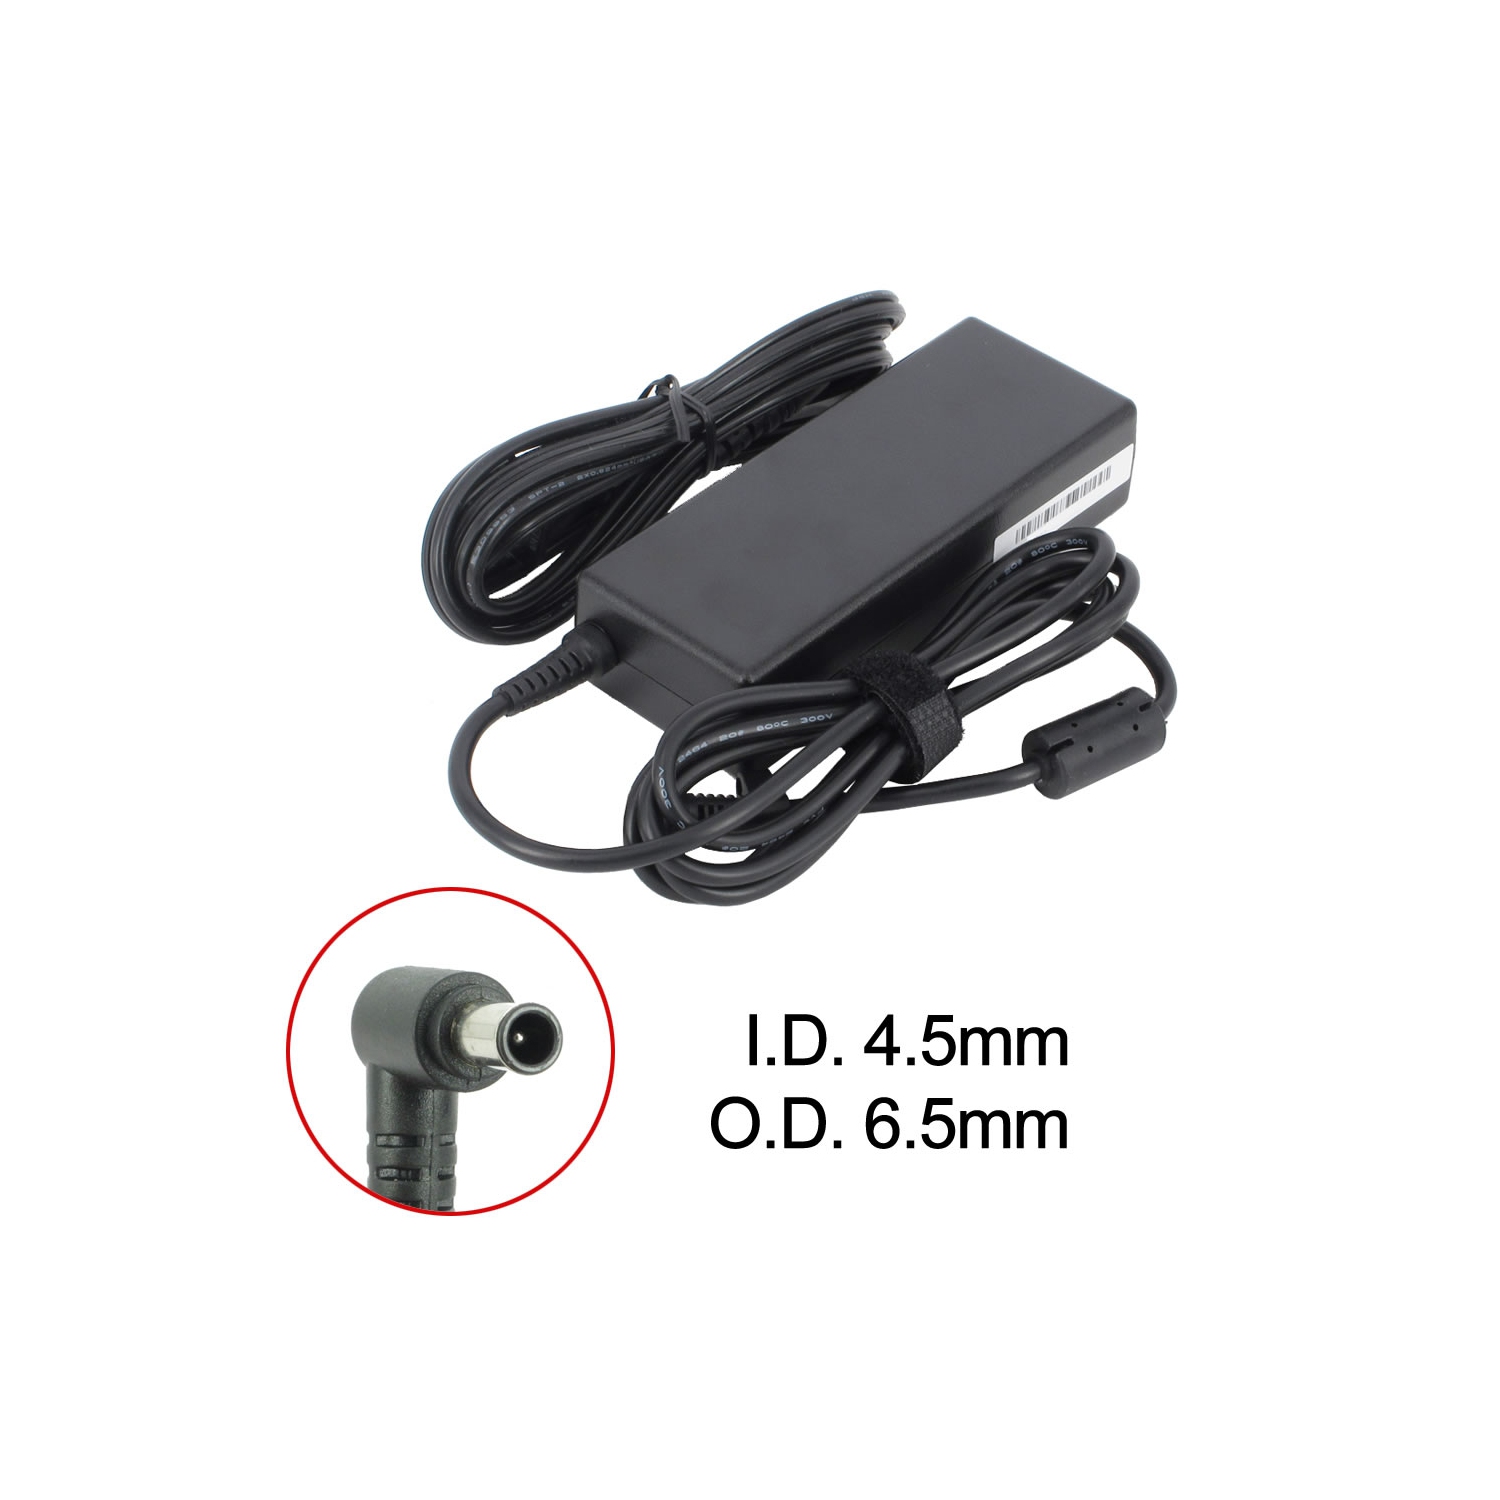 Brand New Laptop AC Adapter for LG XNOTE A510, ADP-90TH A, PCGA-AC19V19, VGP-AC19V14, VGP-AC19V26, VGP-AC19V43